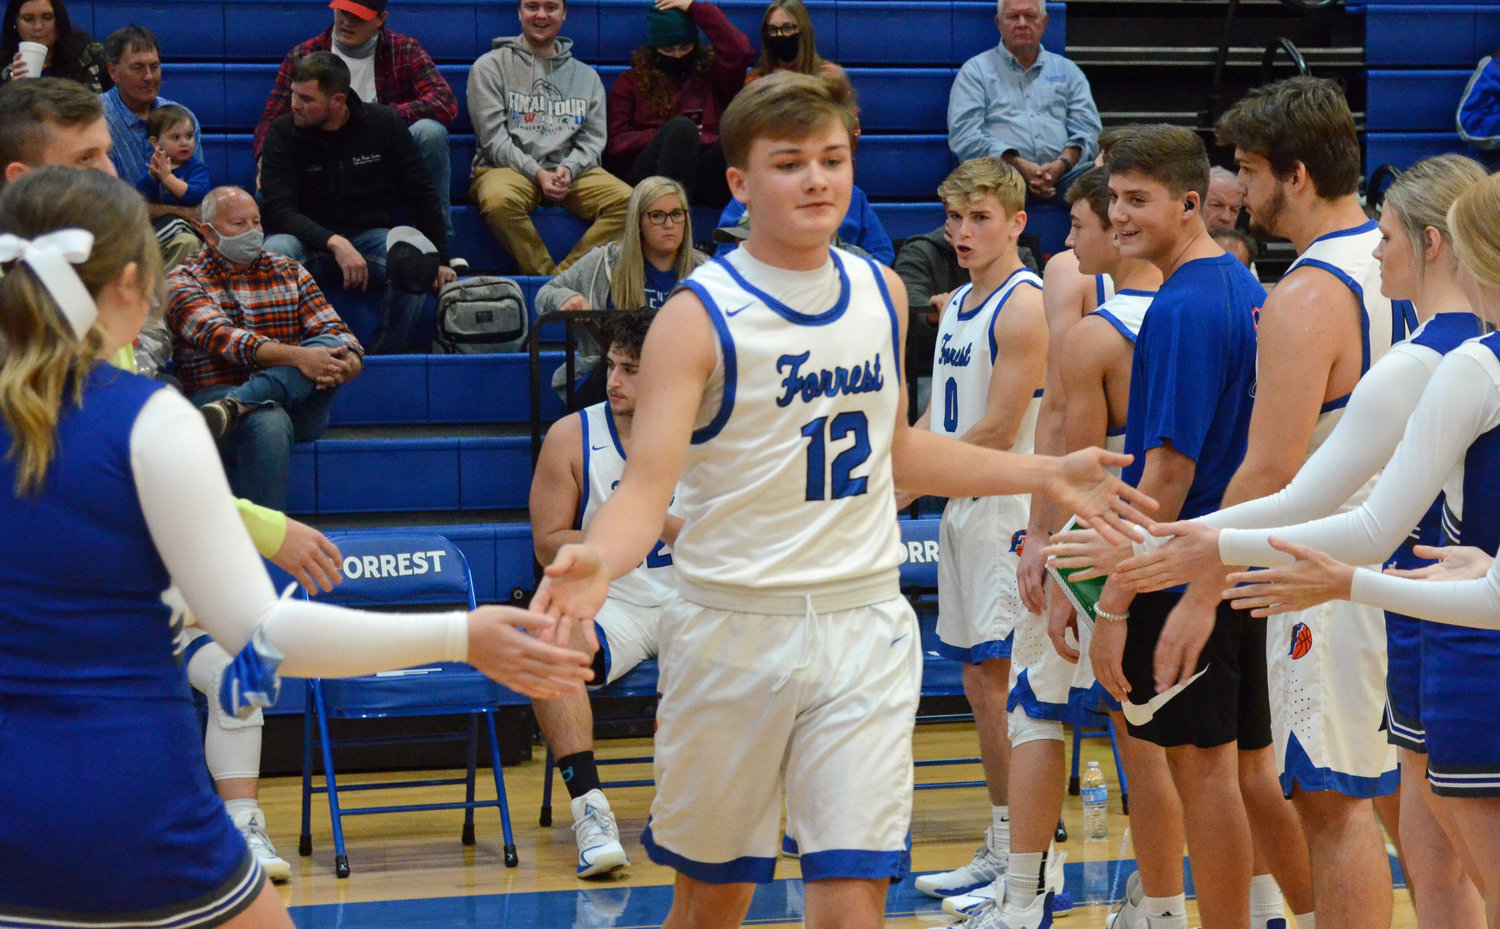 Freshman Brennan Mealer runs out before turning in a stellar varsity debut with 18 points and a game-high four 3-pointers.